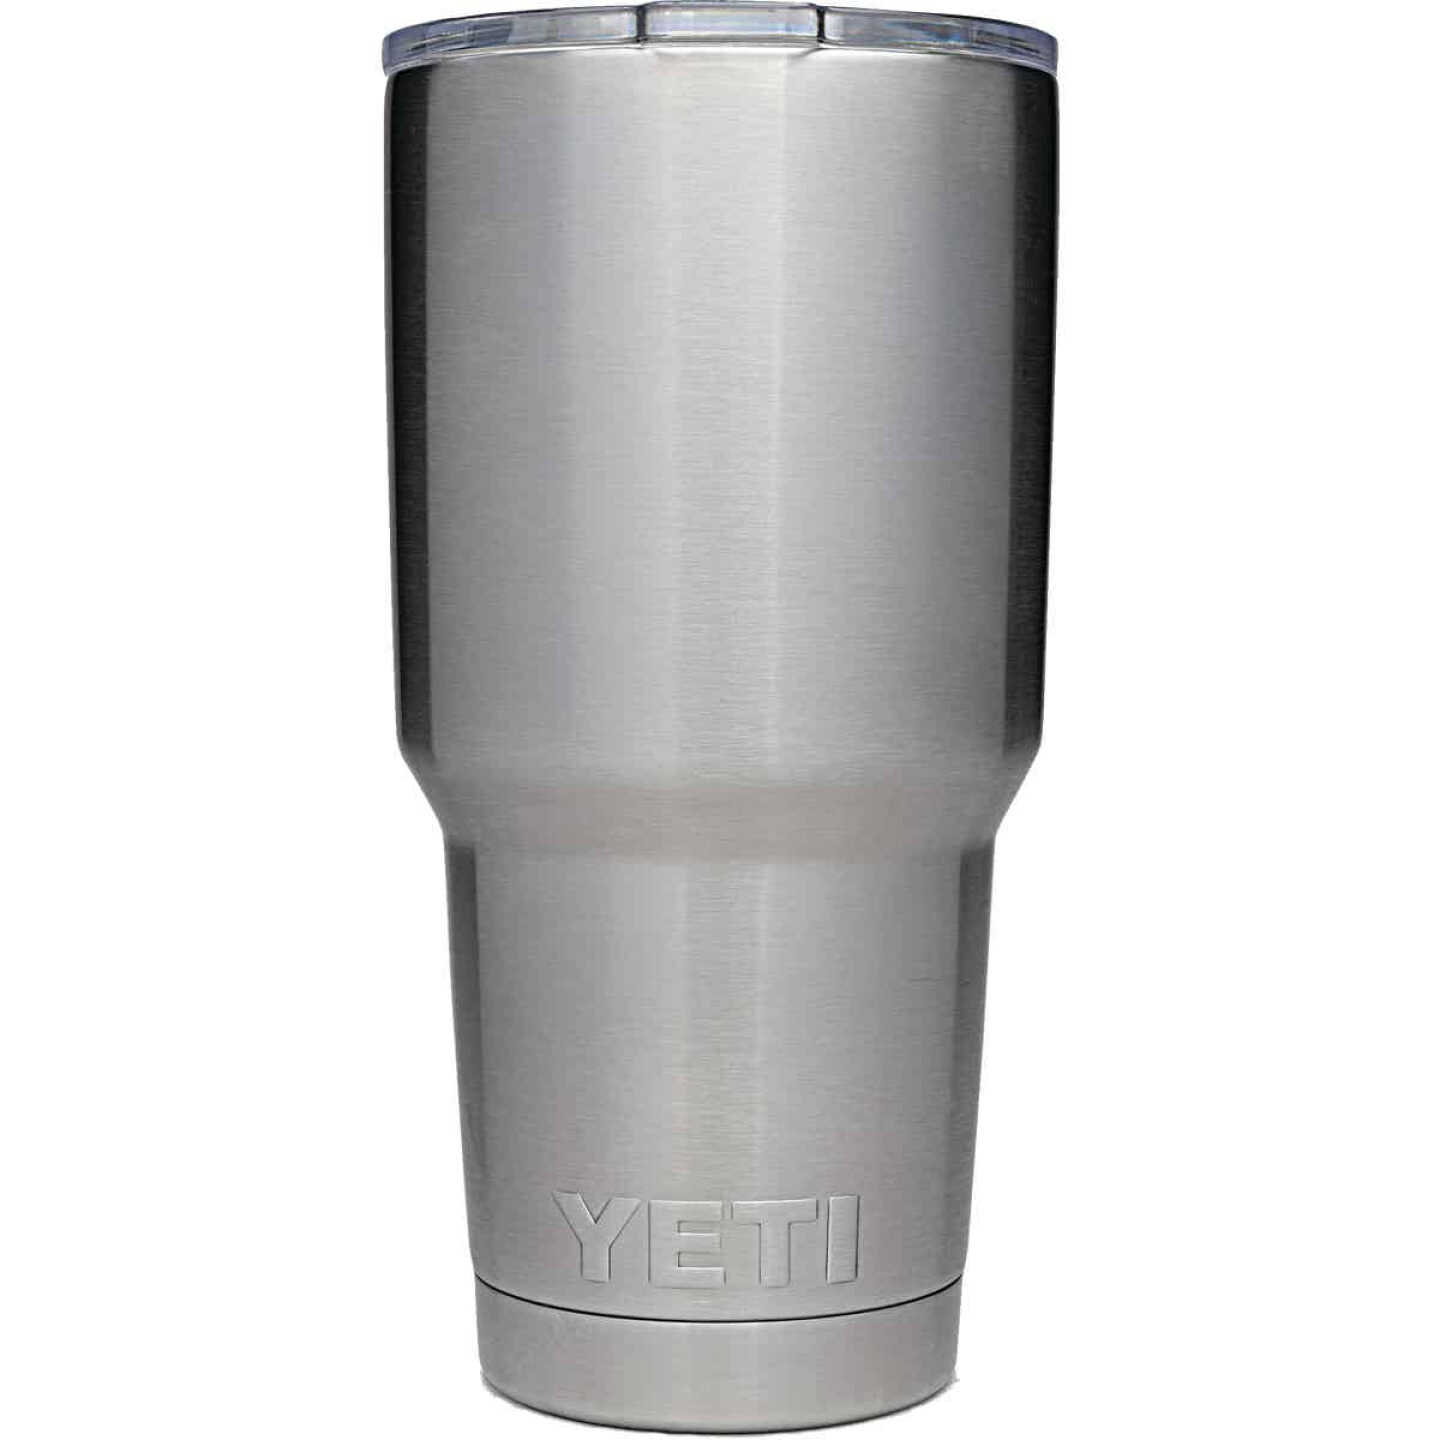 30 oz Stainless Steel Insulated Mugs